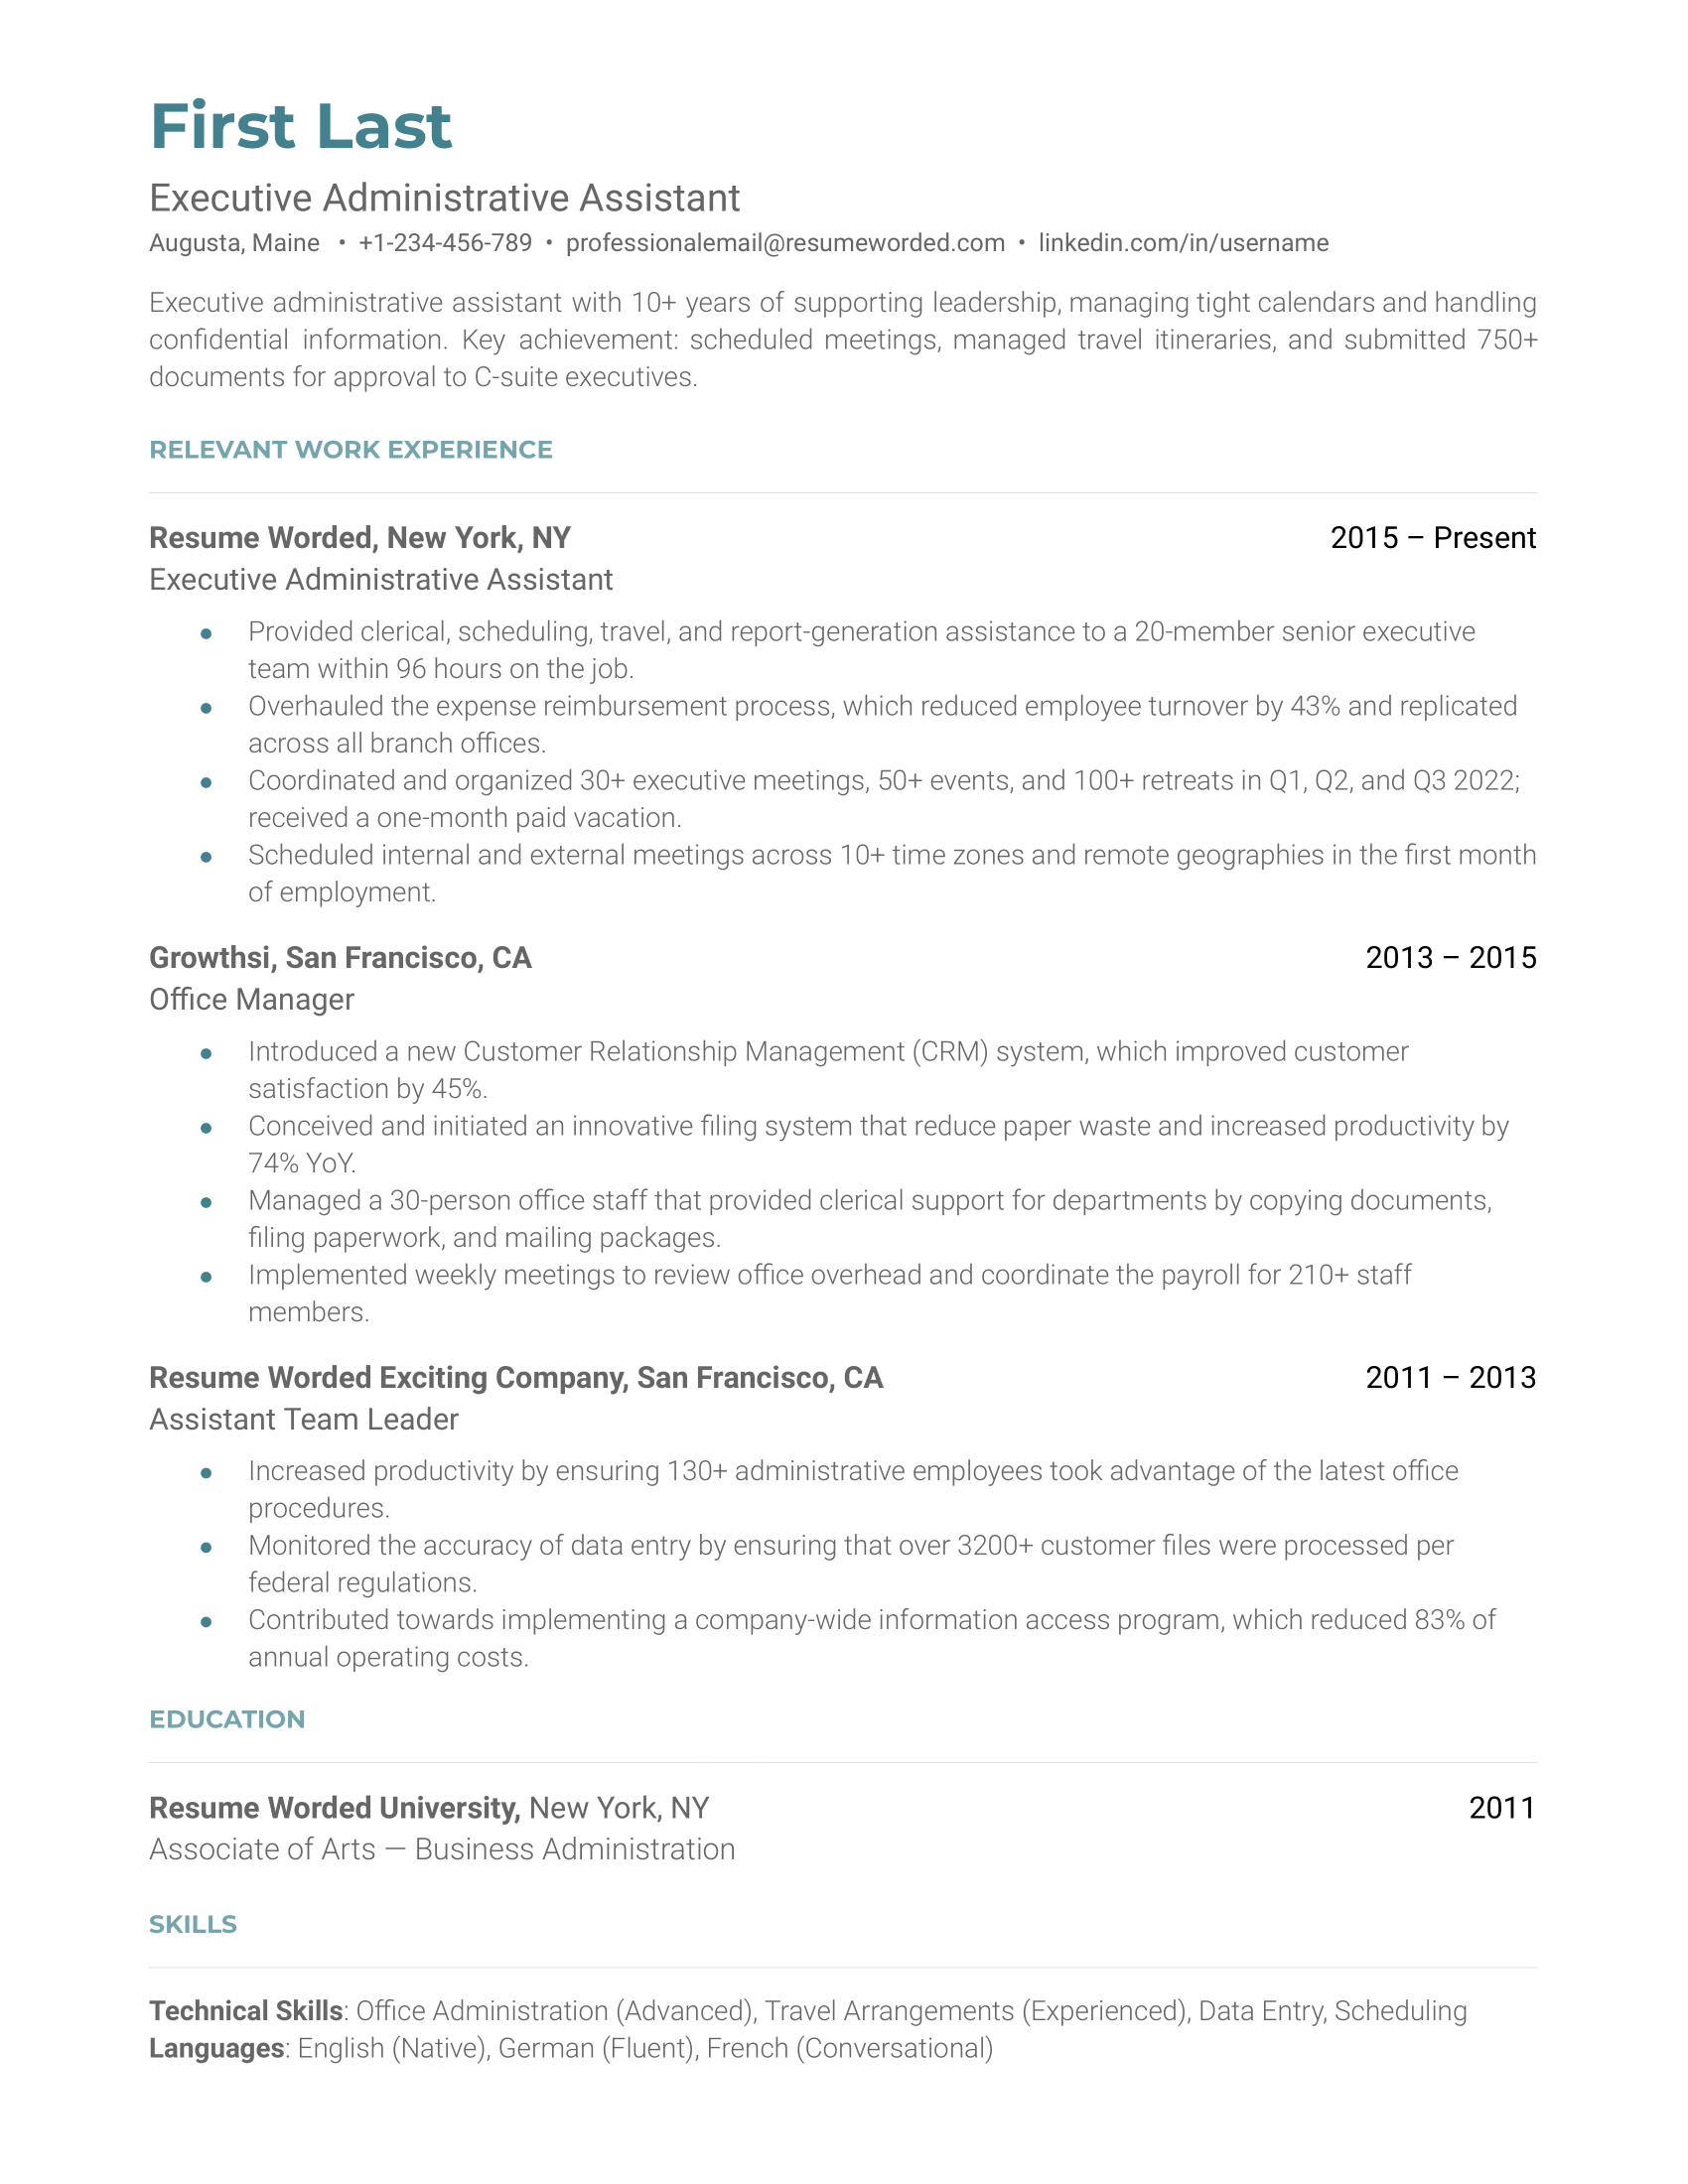 A CV for an Executive Administrative Assistant showcasing project management and tech proficiency.